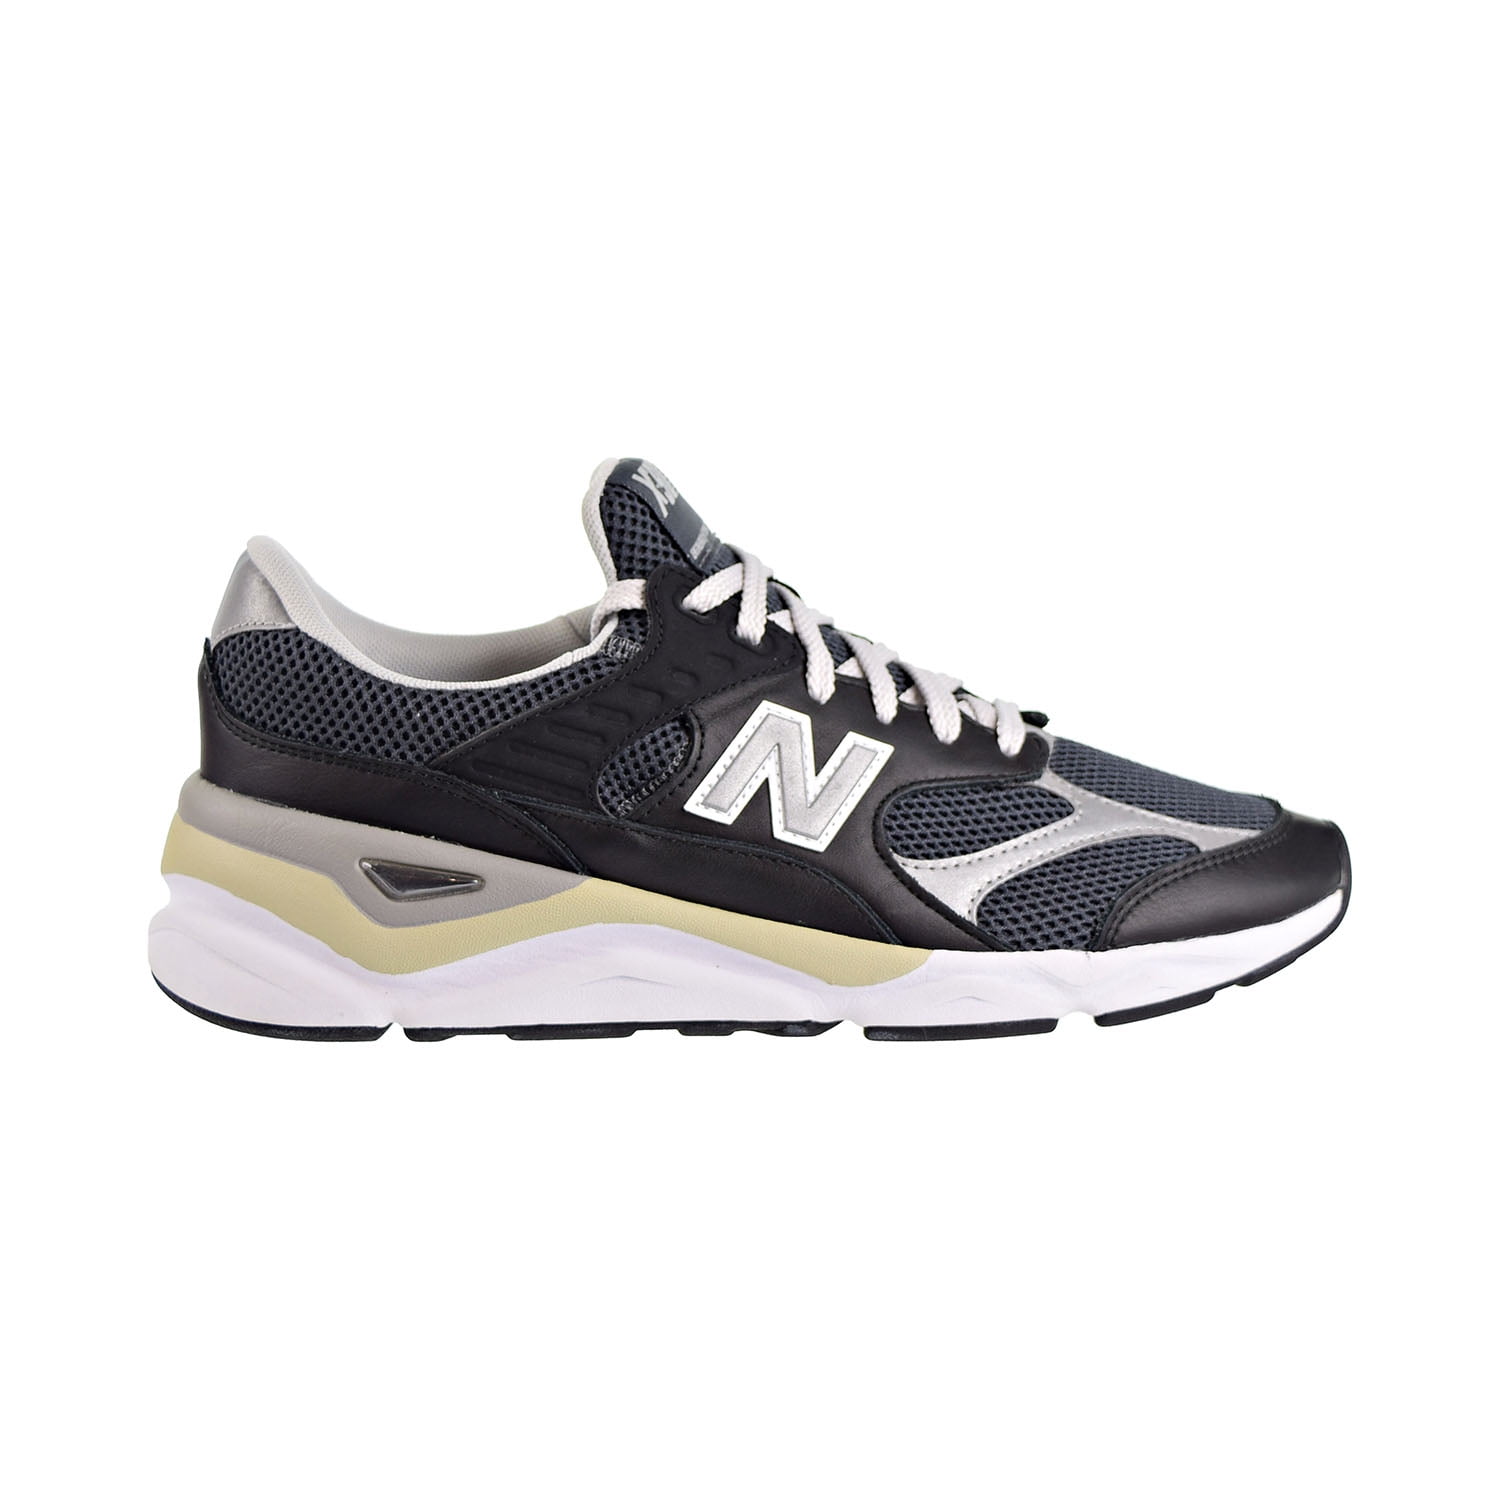 New Balance Men's X-90 Reconstructed Shoes Black with Grey نيني نيني